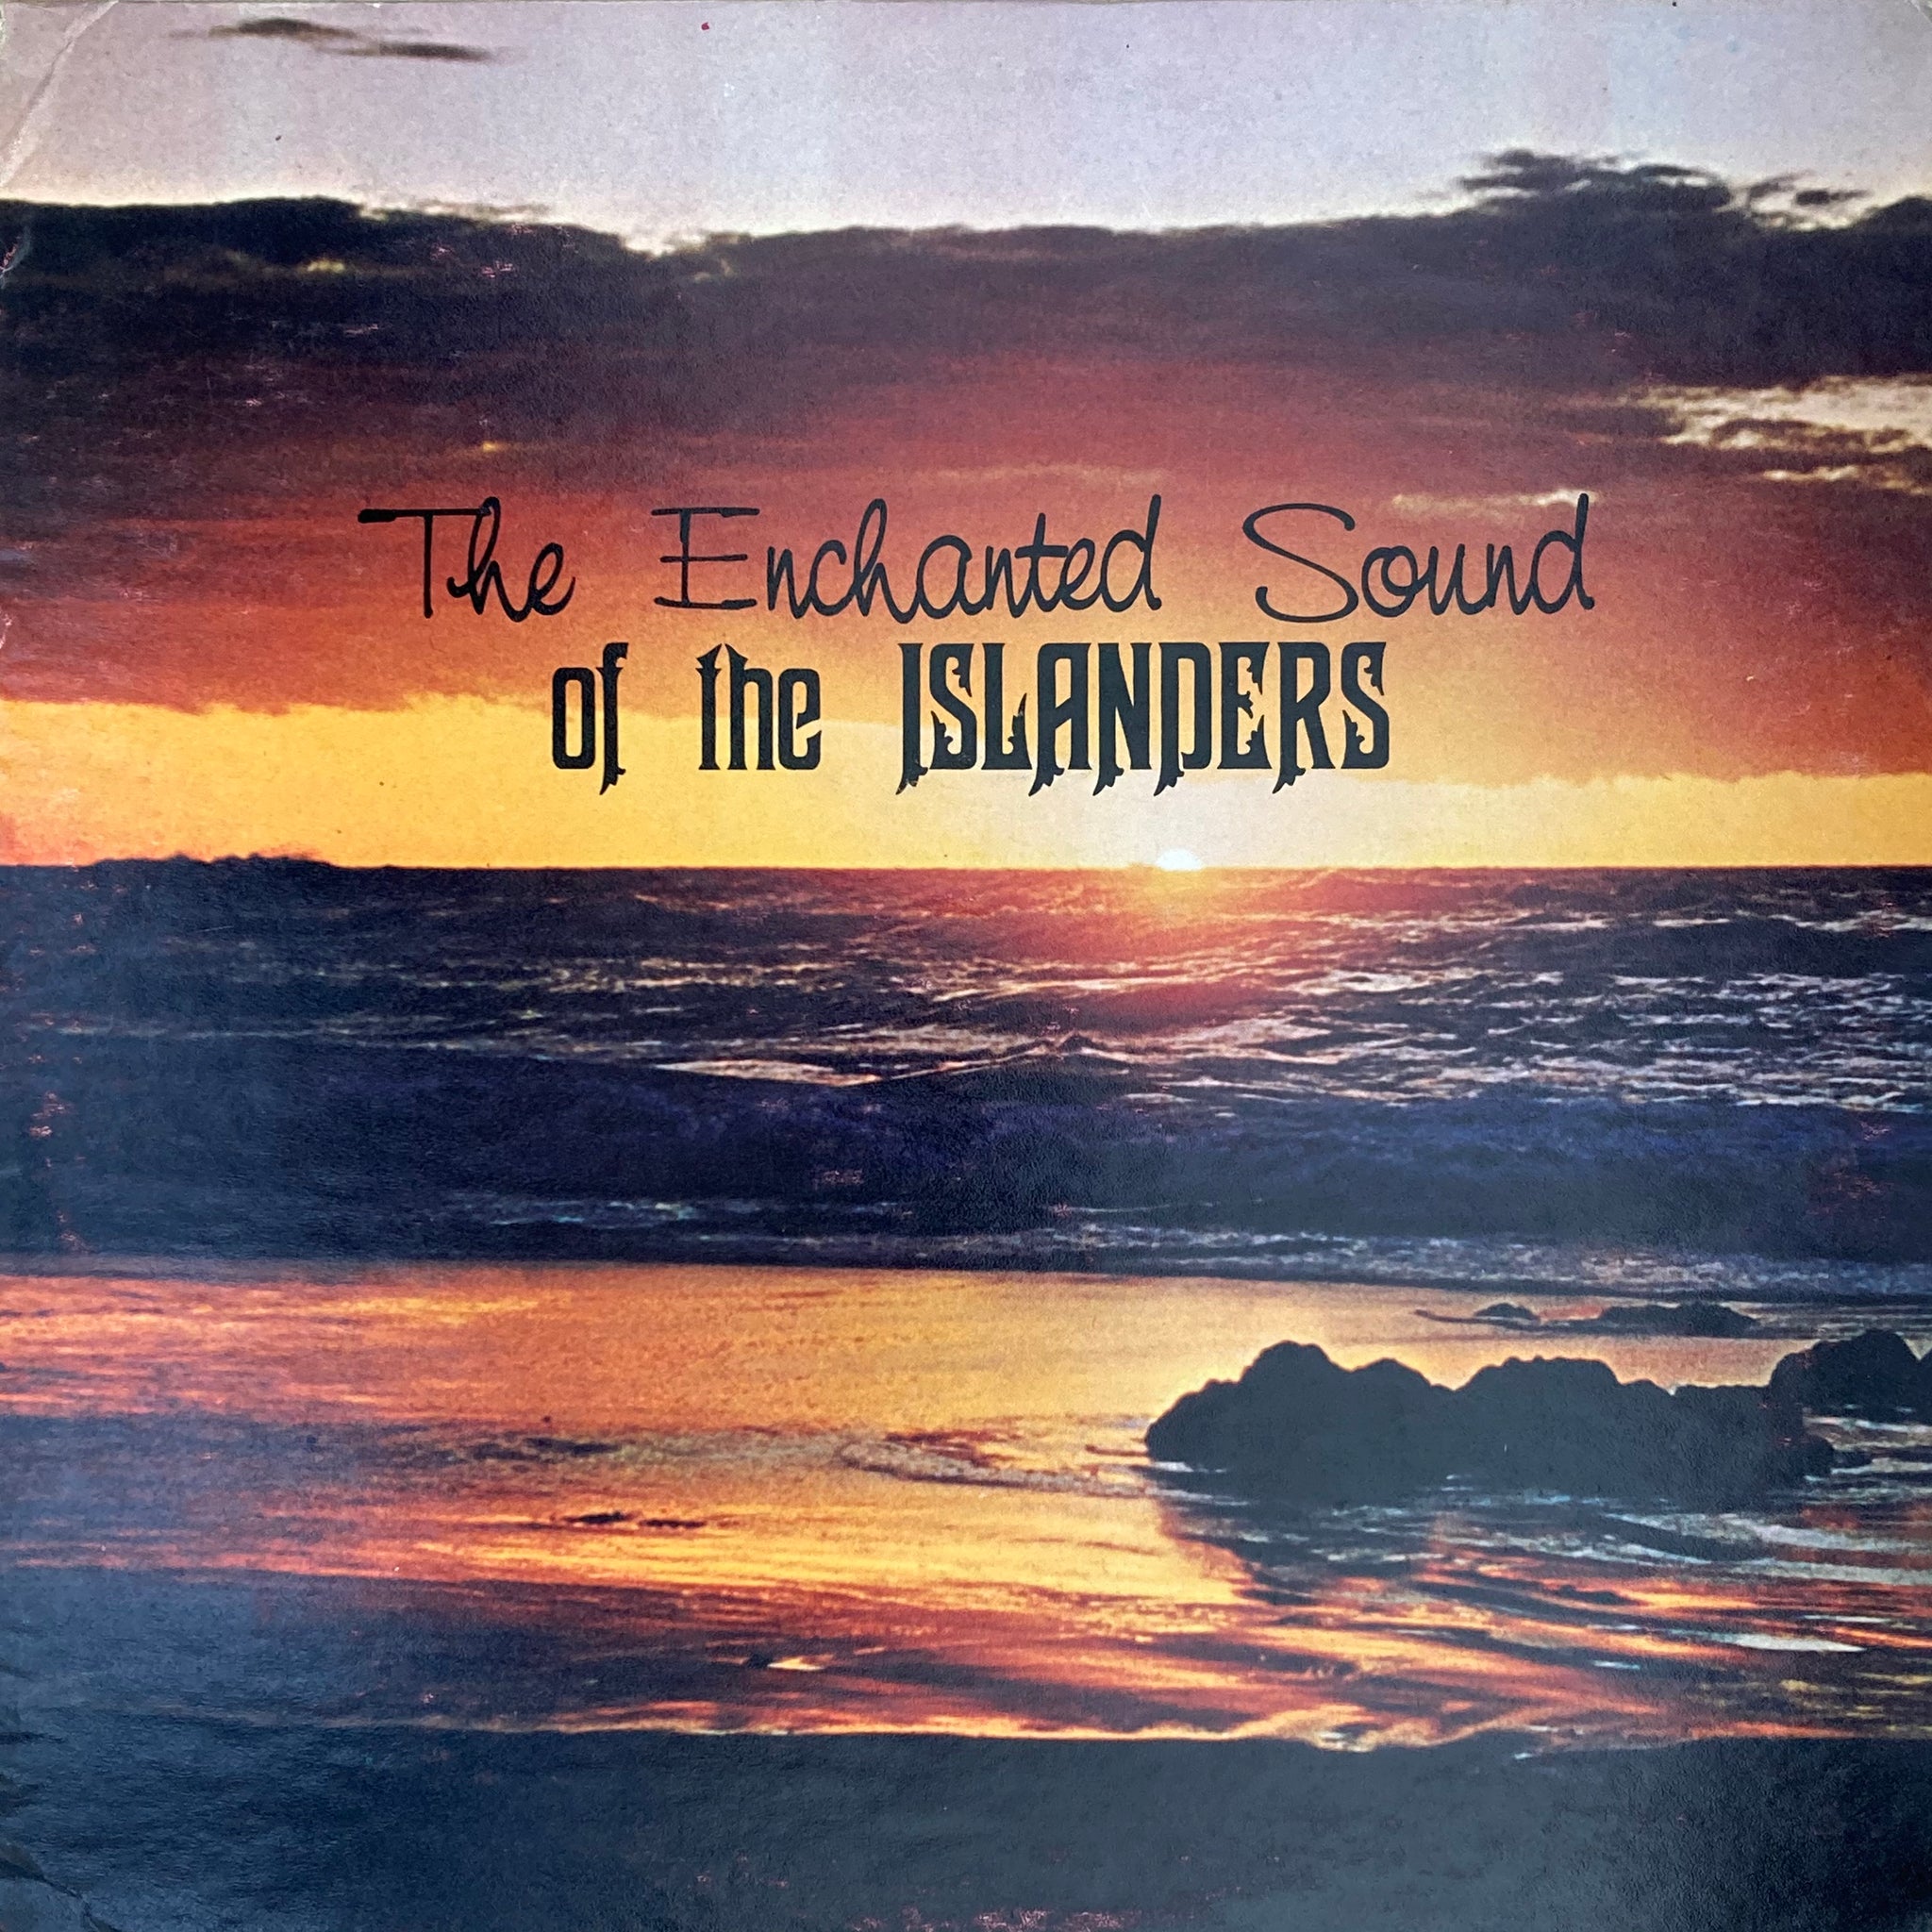 The Islanders - The Enchanted Sounds of